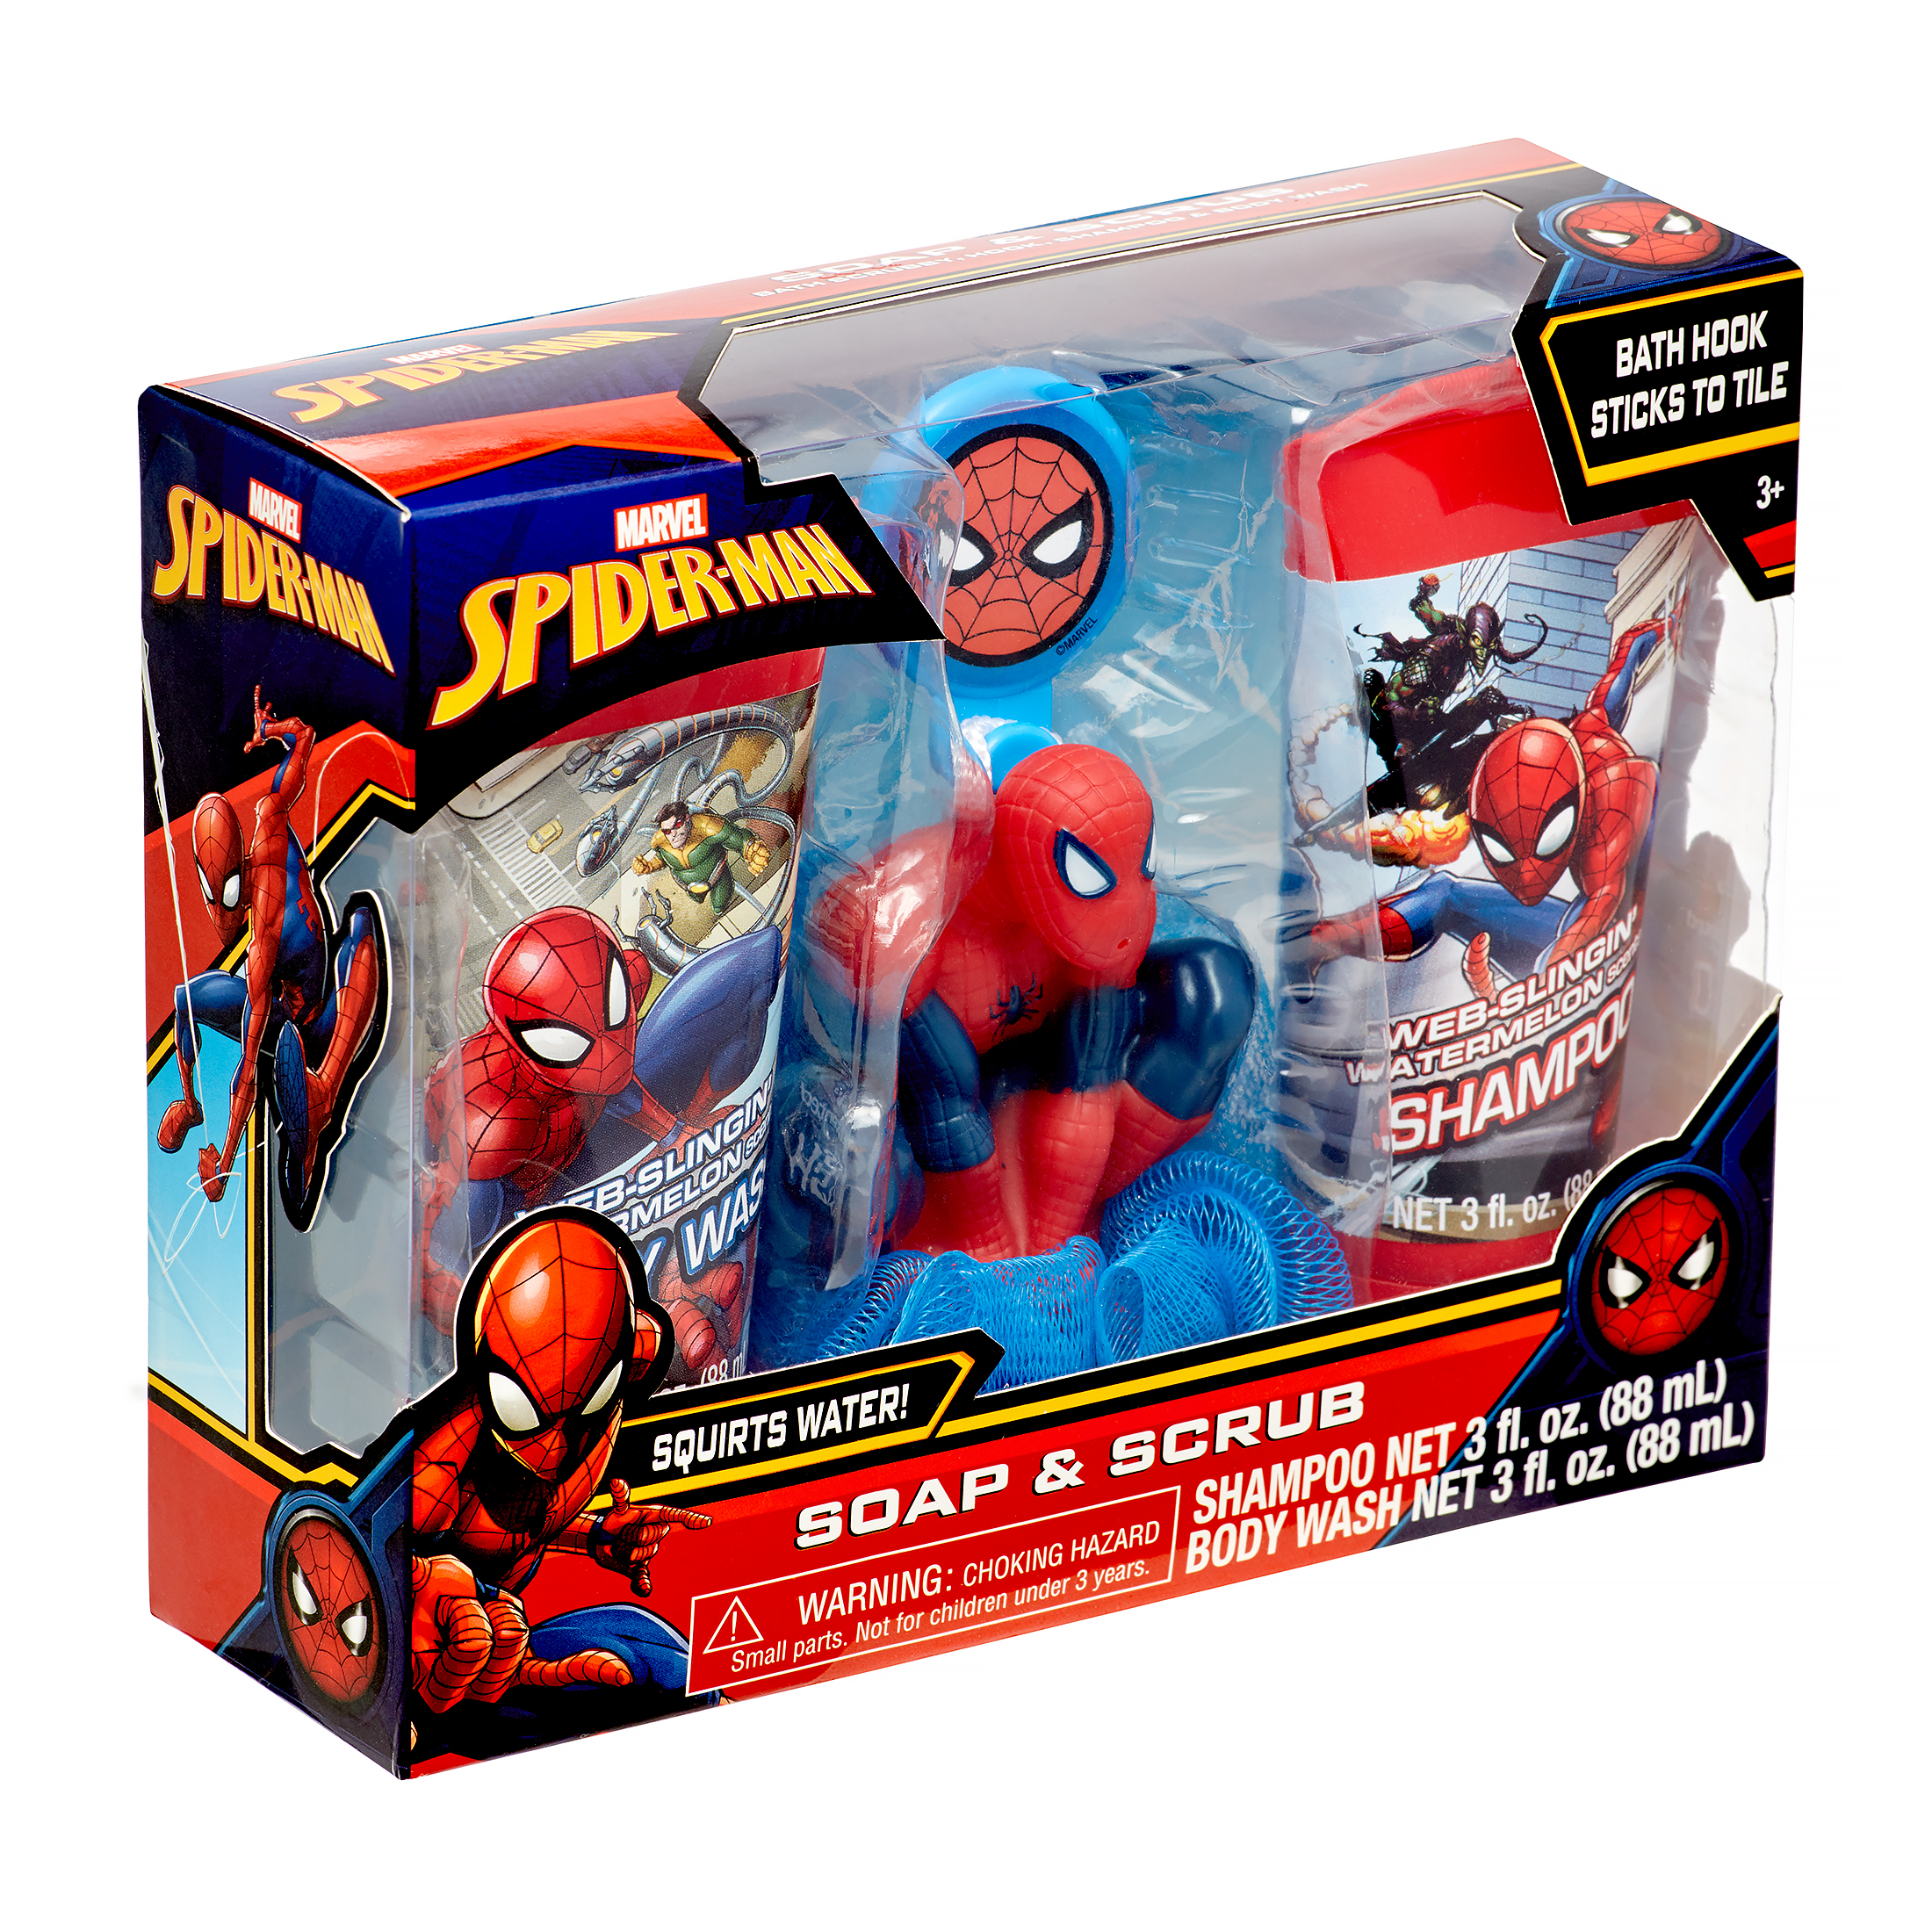 Marvel Spider-Man 4-Piece Soap and Scrub Body Wash and Shampoo Set - image 3 of 5